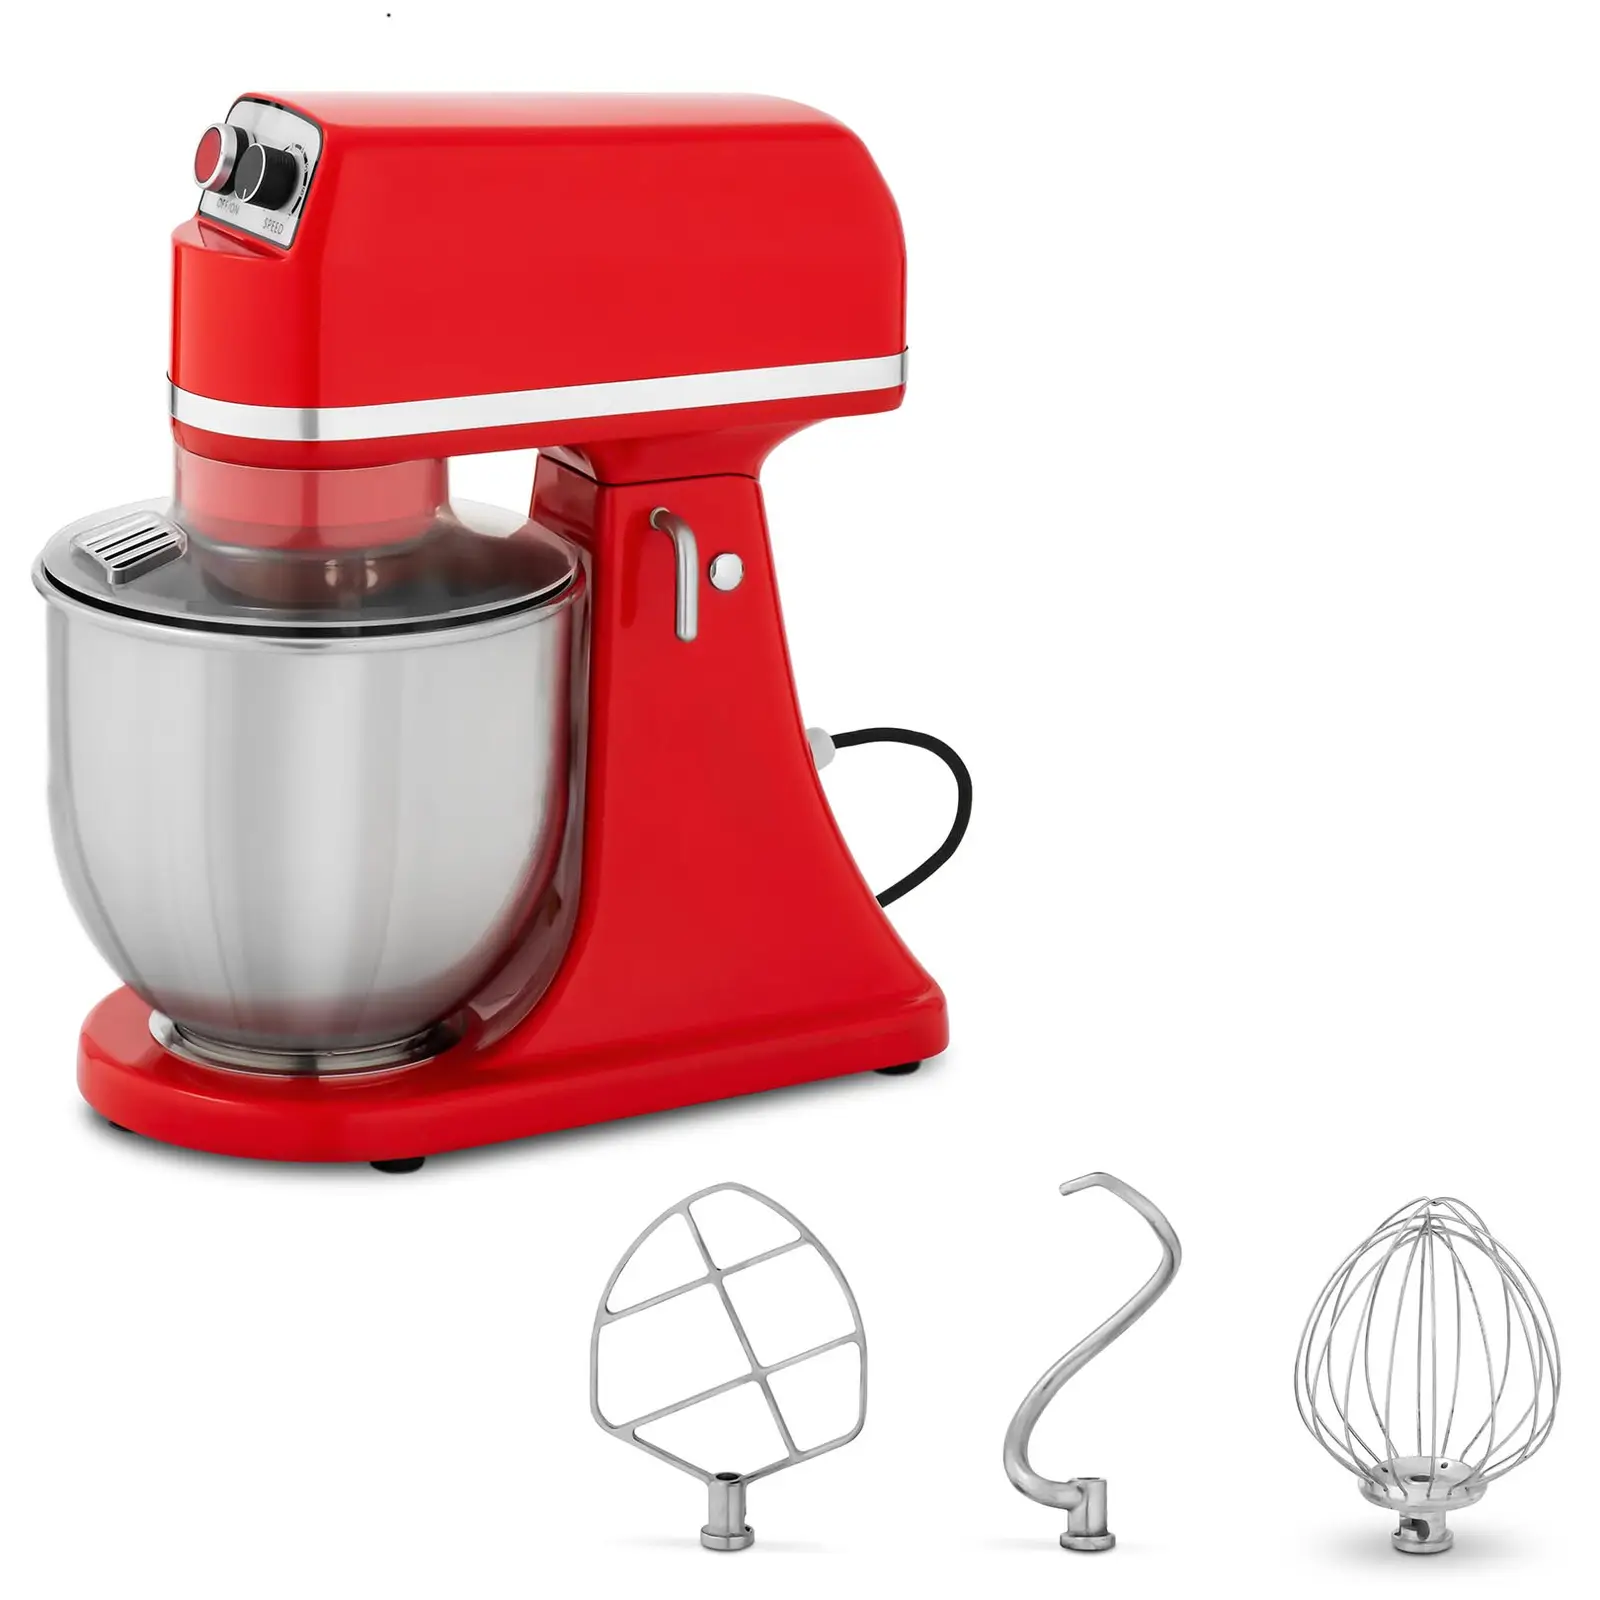 Stand Mixer - 350 W - Royal Catering